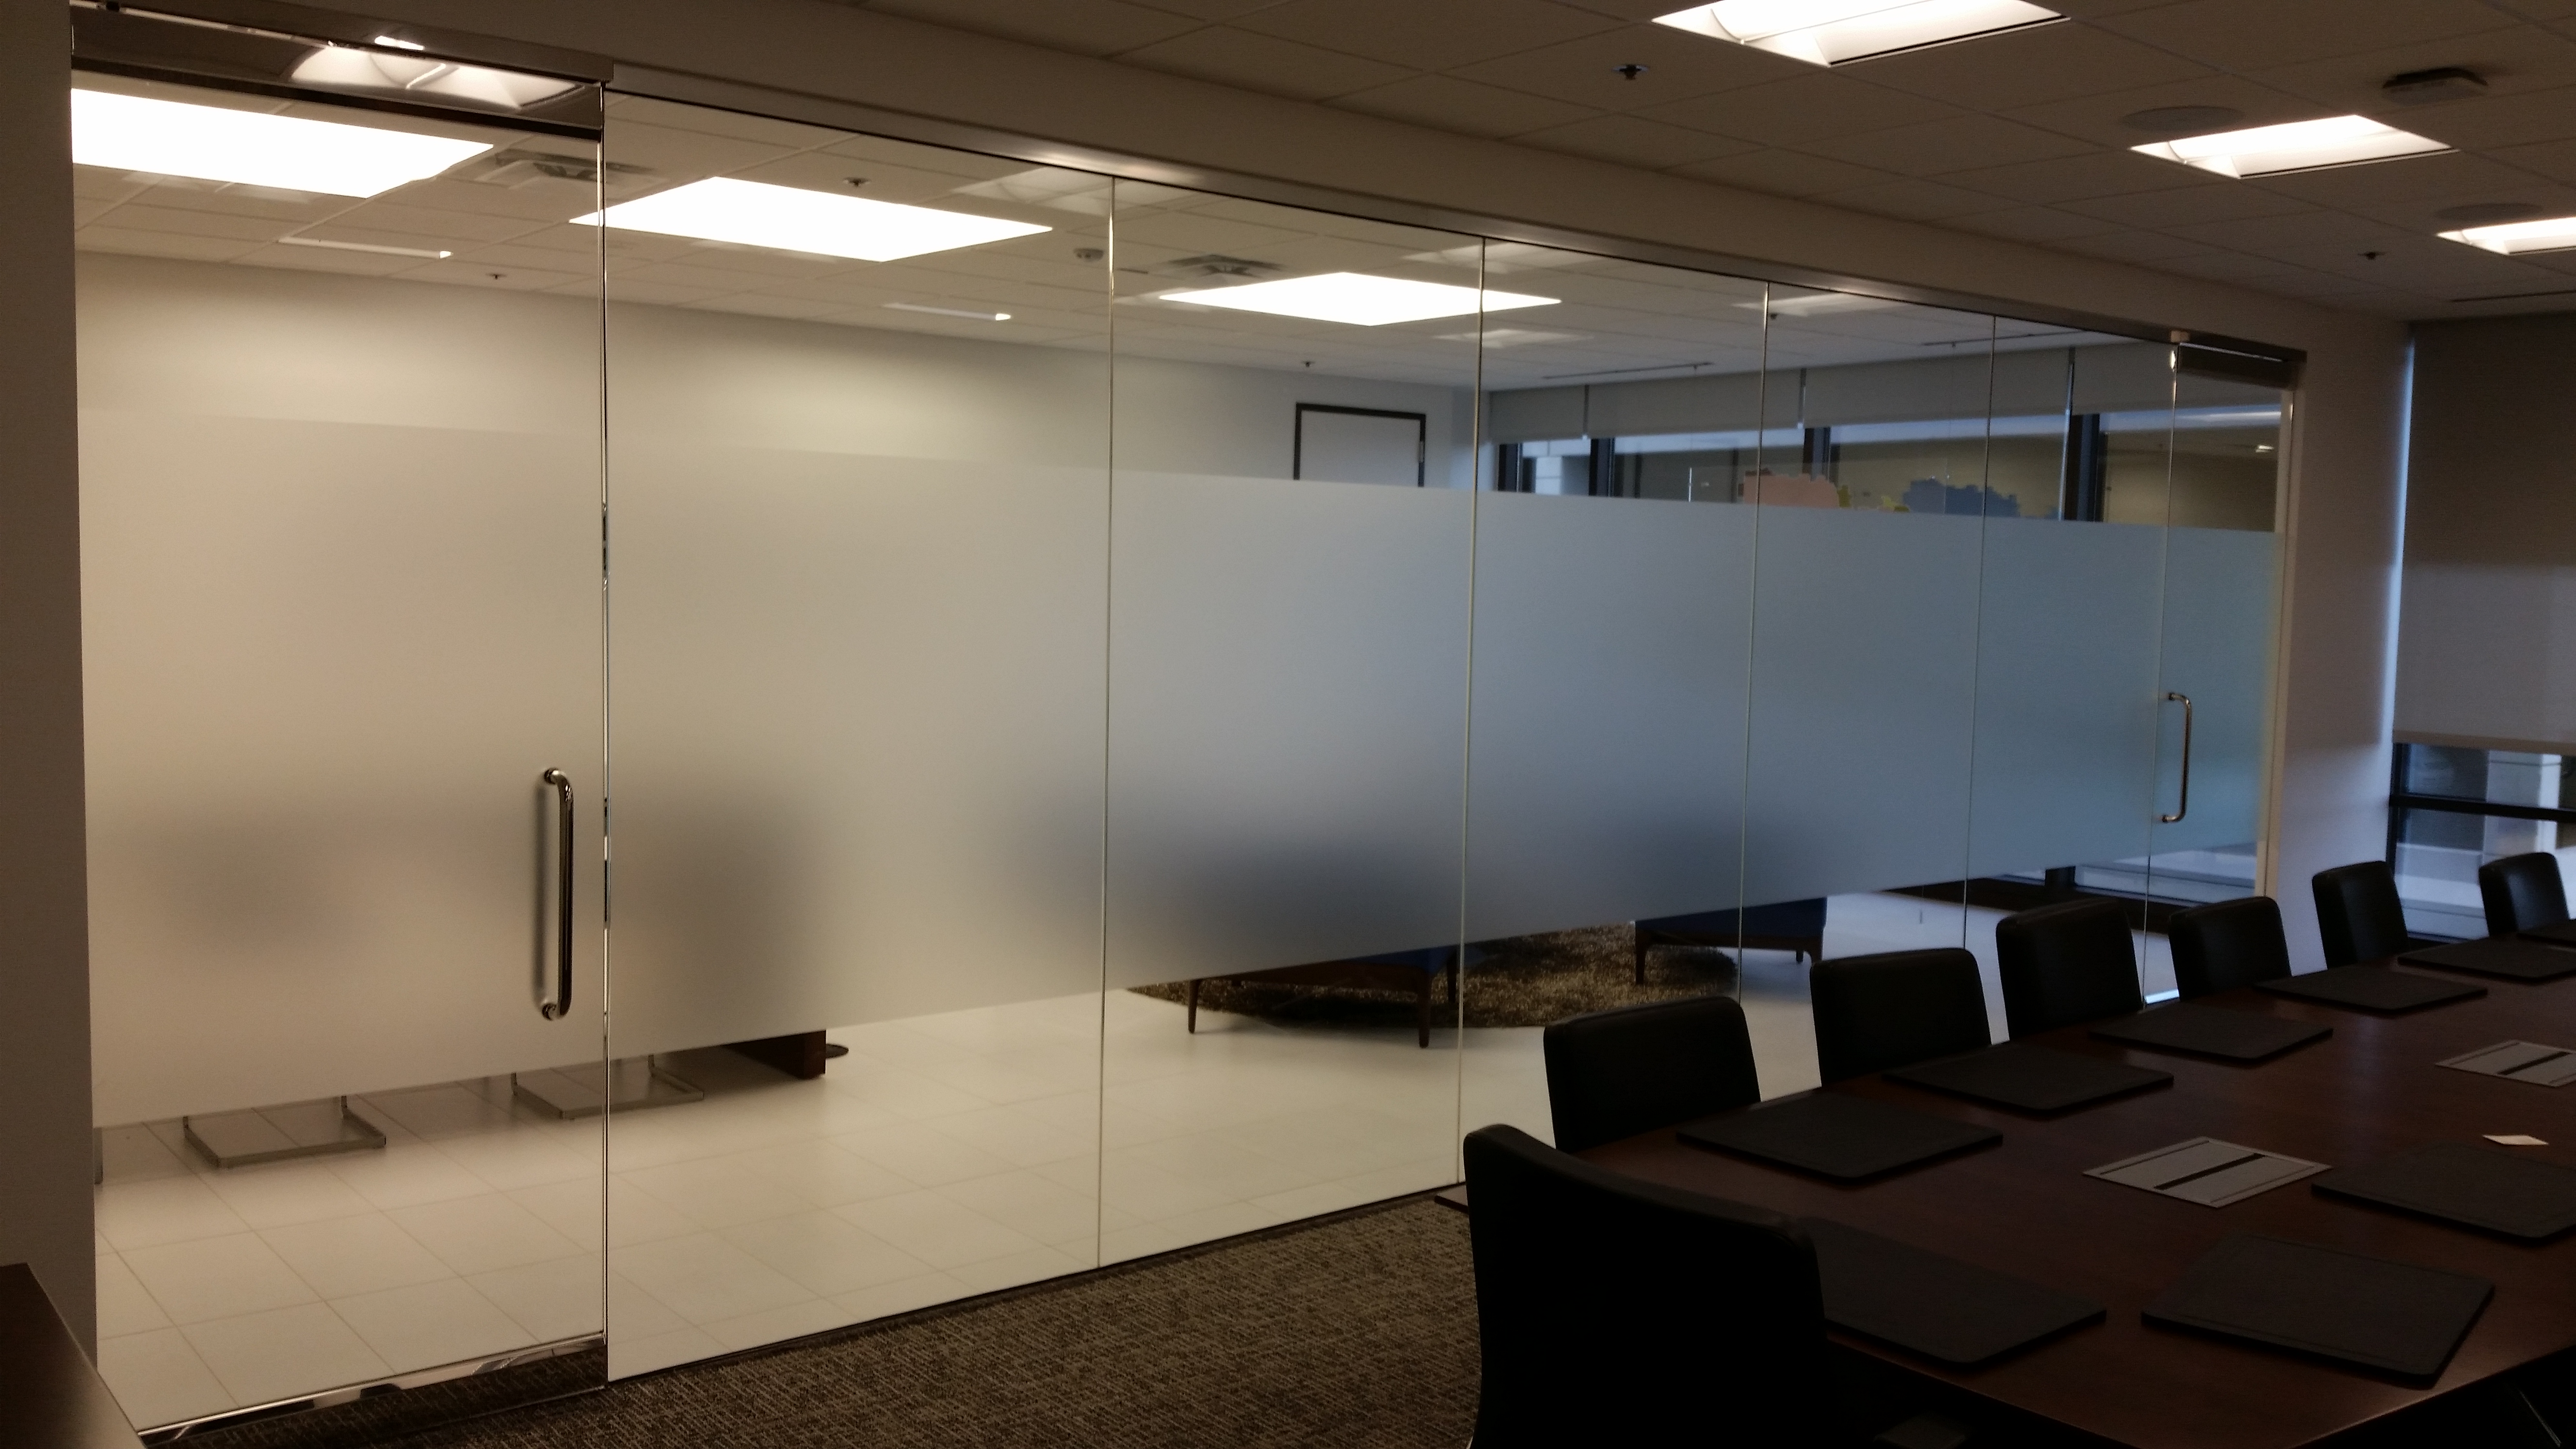 Frosted window film for office meeting area